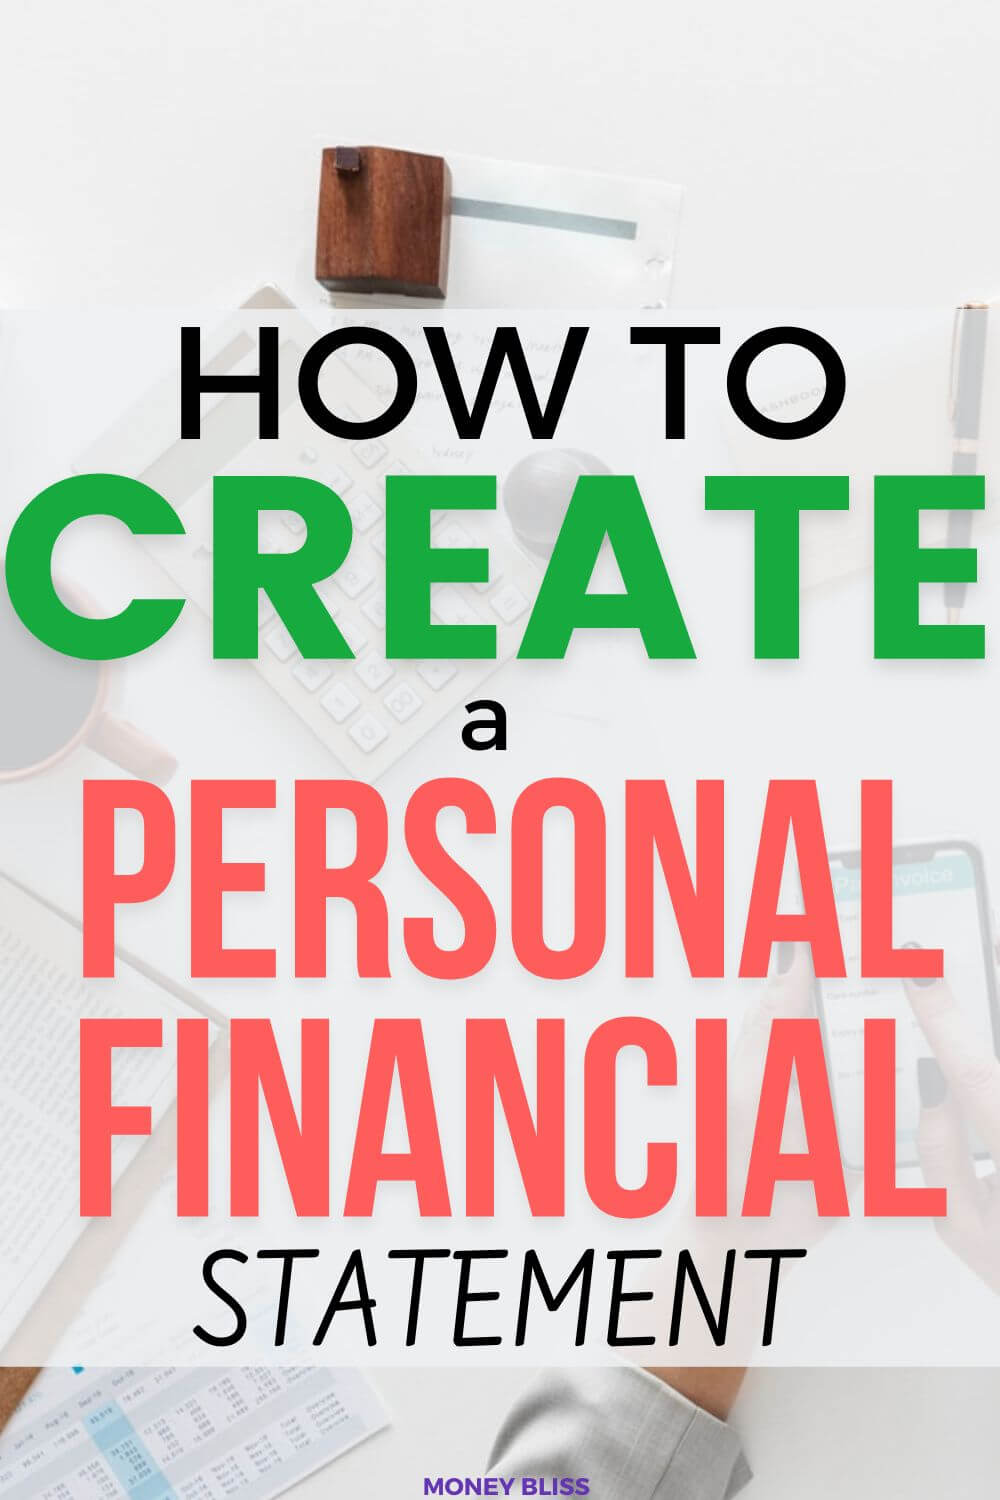 Learn how to create a personal financial statement in an easy way. The statement is for those who want to know about the financial status of their home, family and business.